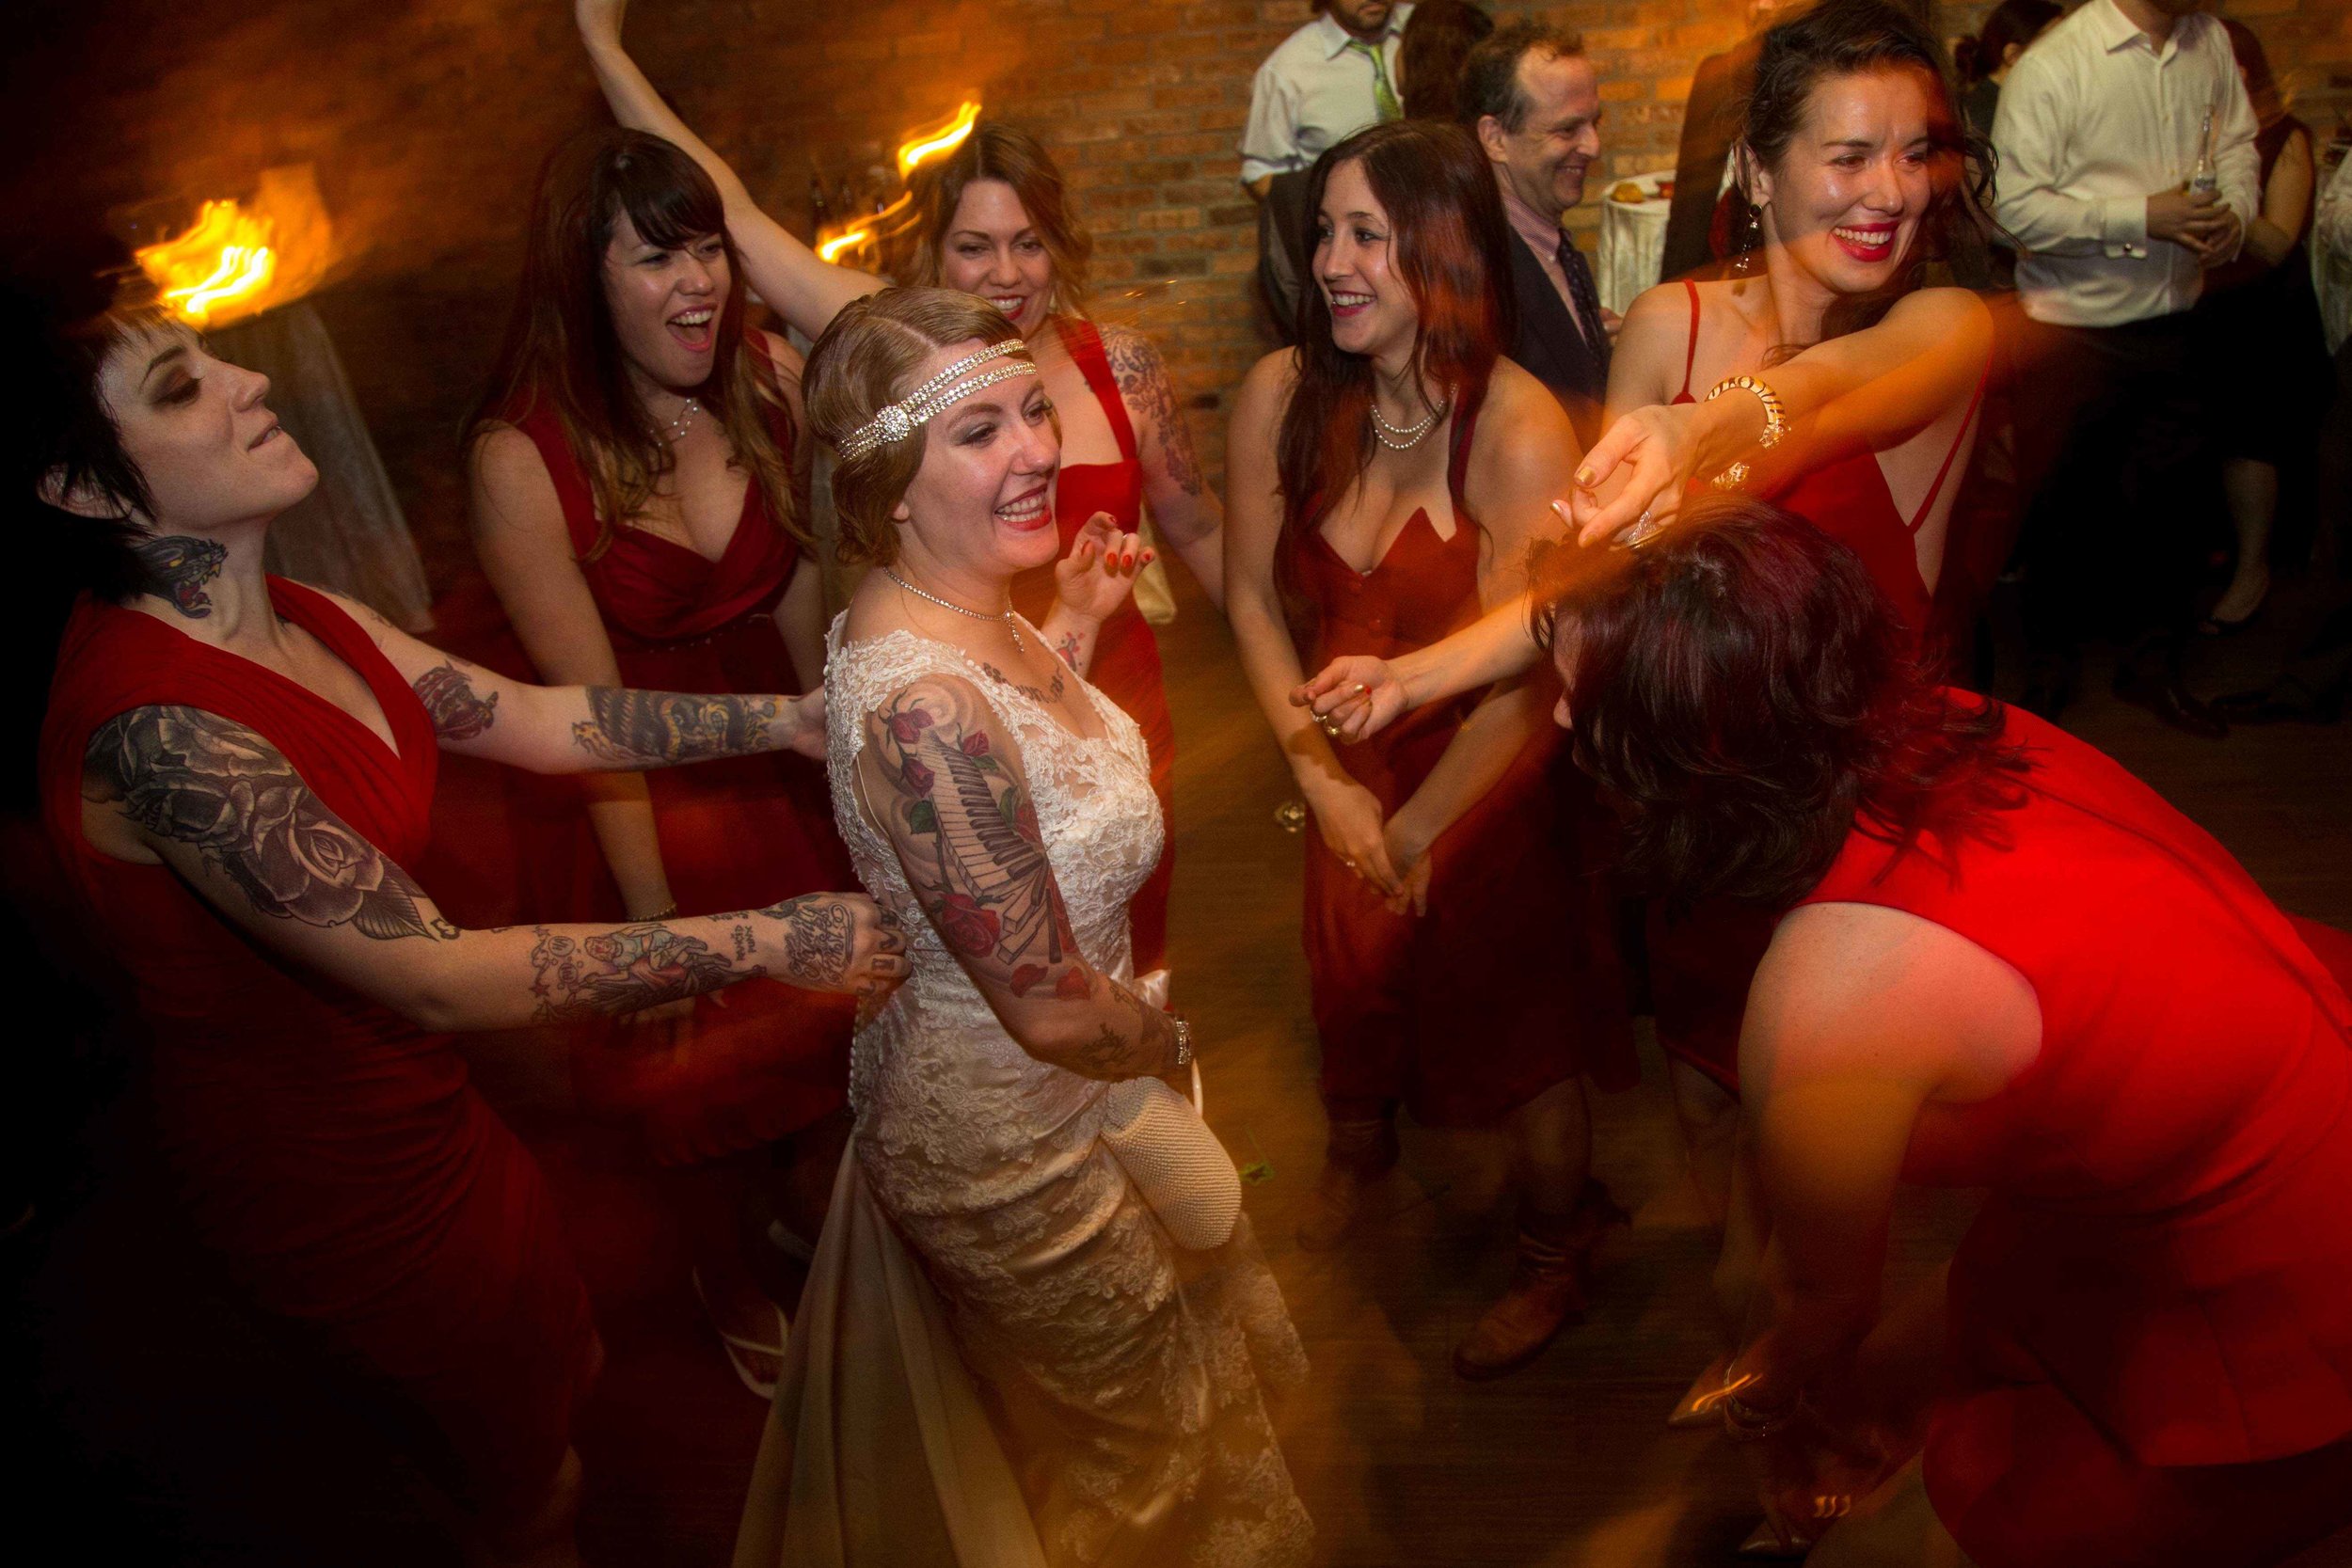 Dancing with Bridesmaids